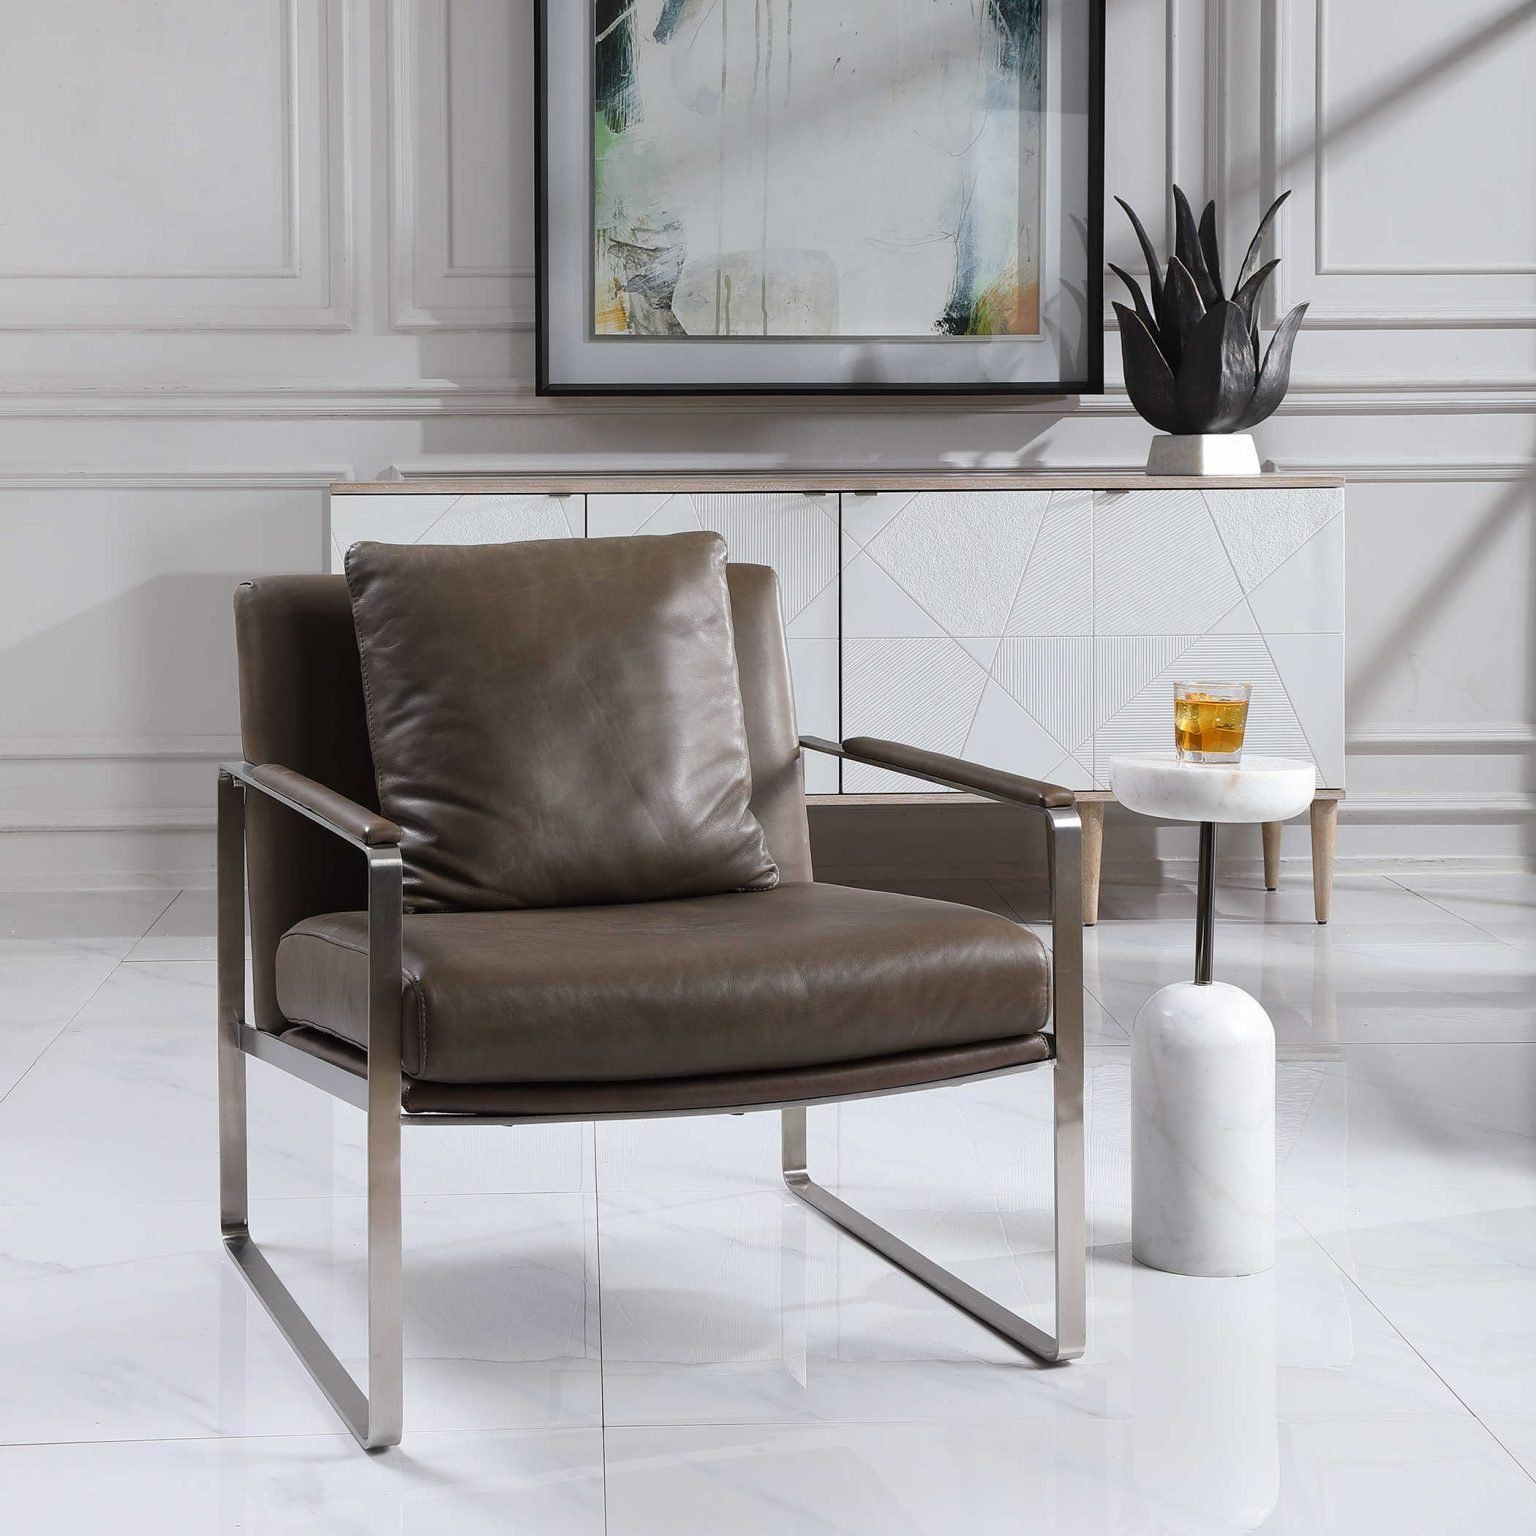 Square leather-padded chair is retro and on trend for 2021